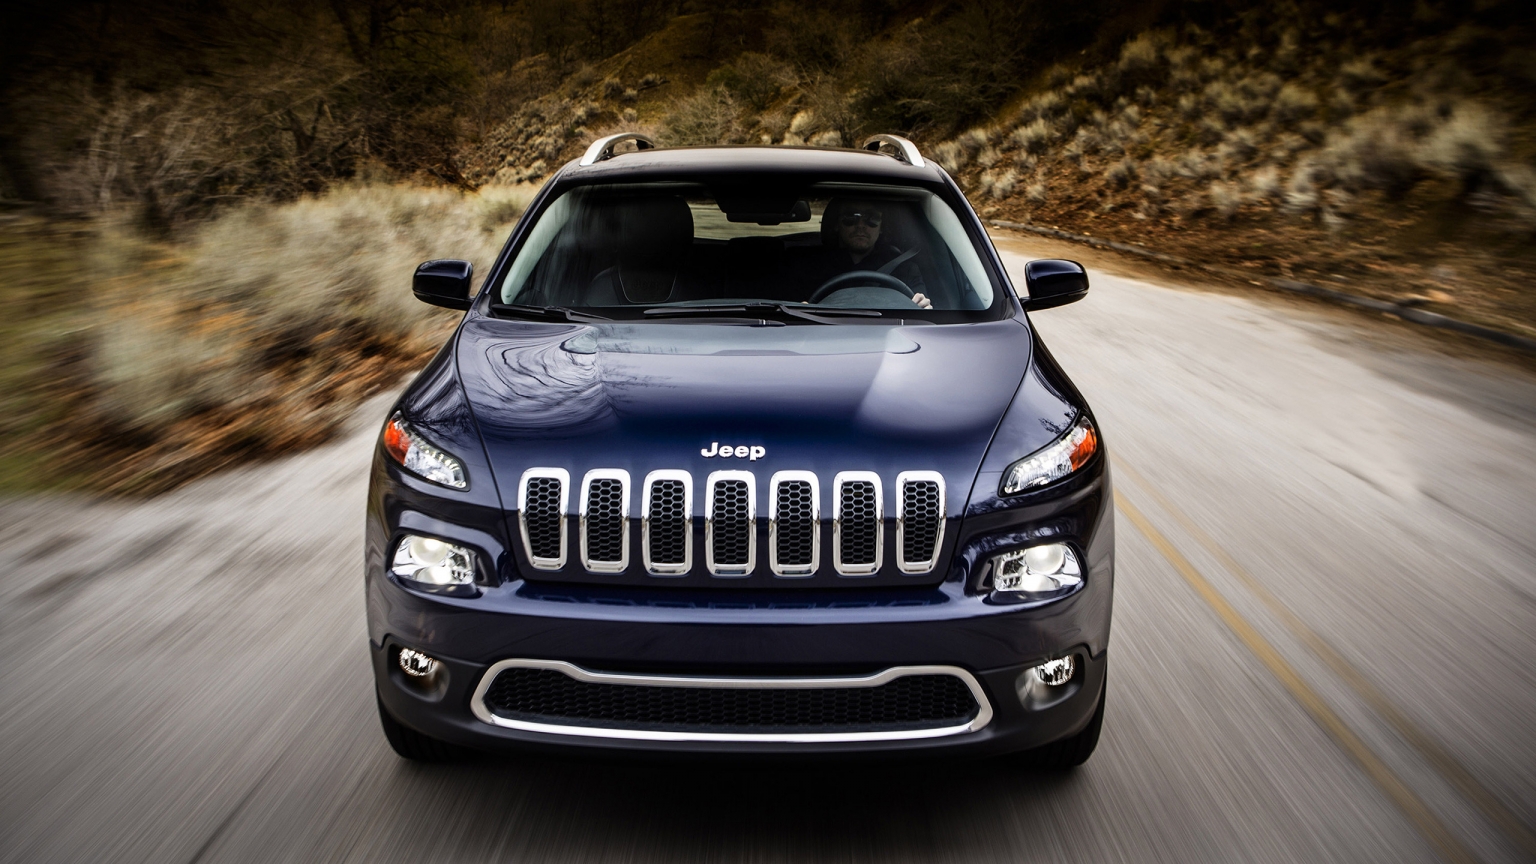 2014 Jeep Cherokee for 1536 x 864 HDTV resolution